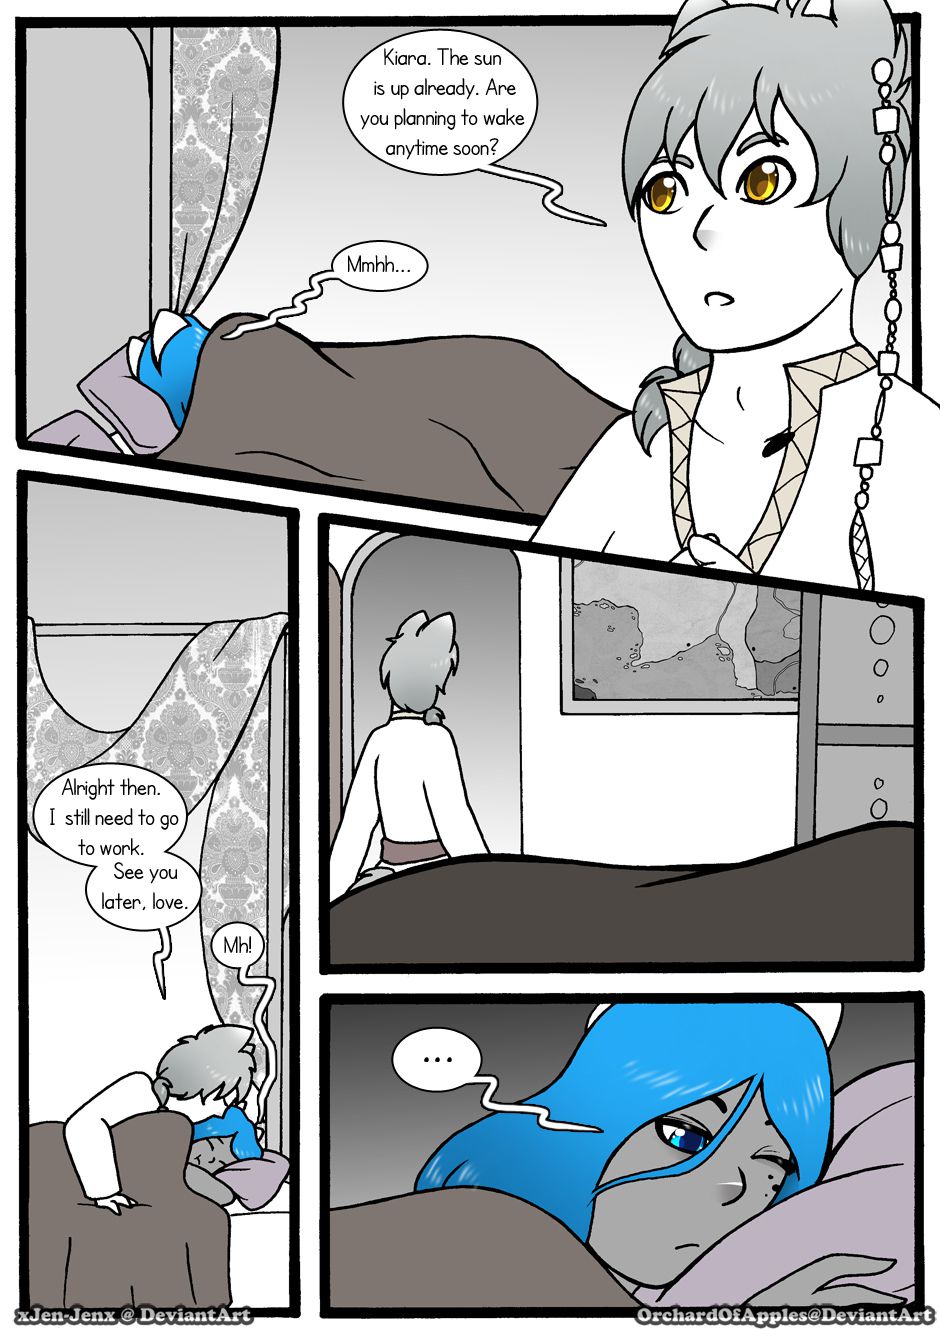 [Jeny-jen94] Between Kings and Queens [Ongoing] 230